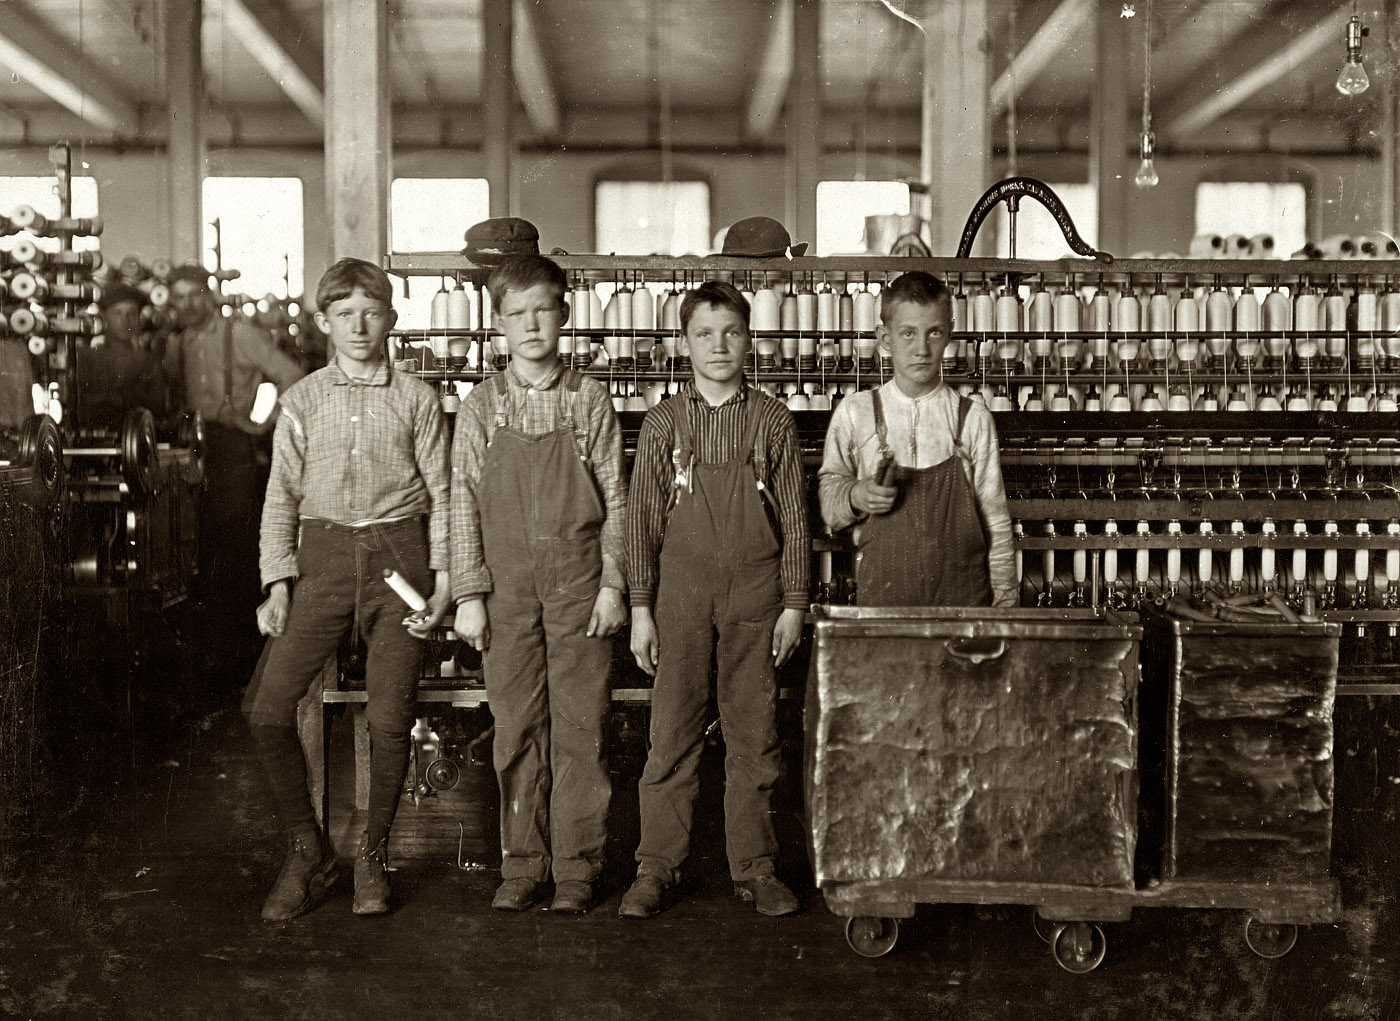 November 1908. Cotton mill workers at Daniel Manufacturing Co. in Lincolnton, North Carolina. Four doffers. Boy on left end (knee pants) said he had worked in the mills for seven years and some nights. At nights they work 12 hours, without any hour off for lunch. Eat when they can. Some of them "eat a-workin'." Photograph and caption by Lewis Wickes Hine. View full size.